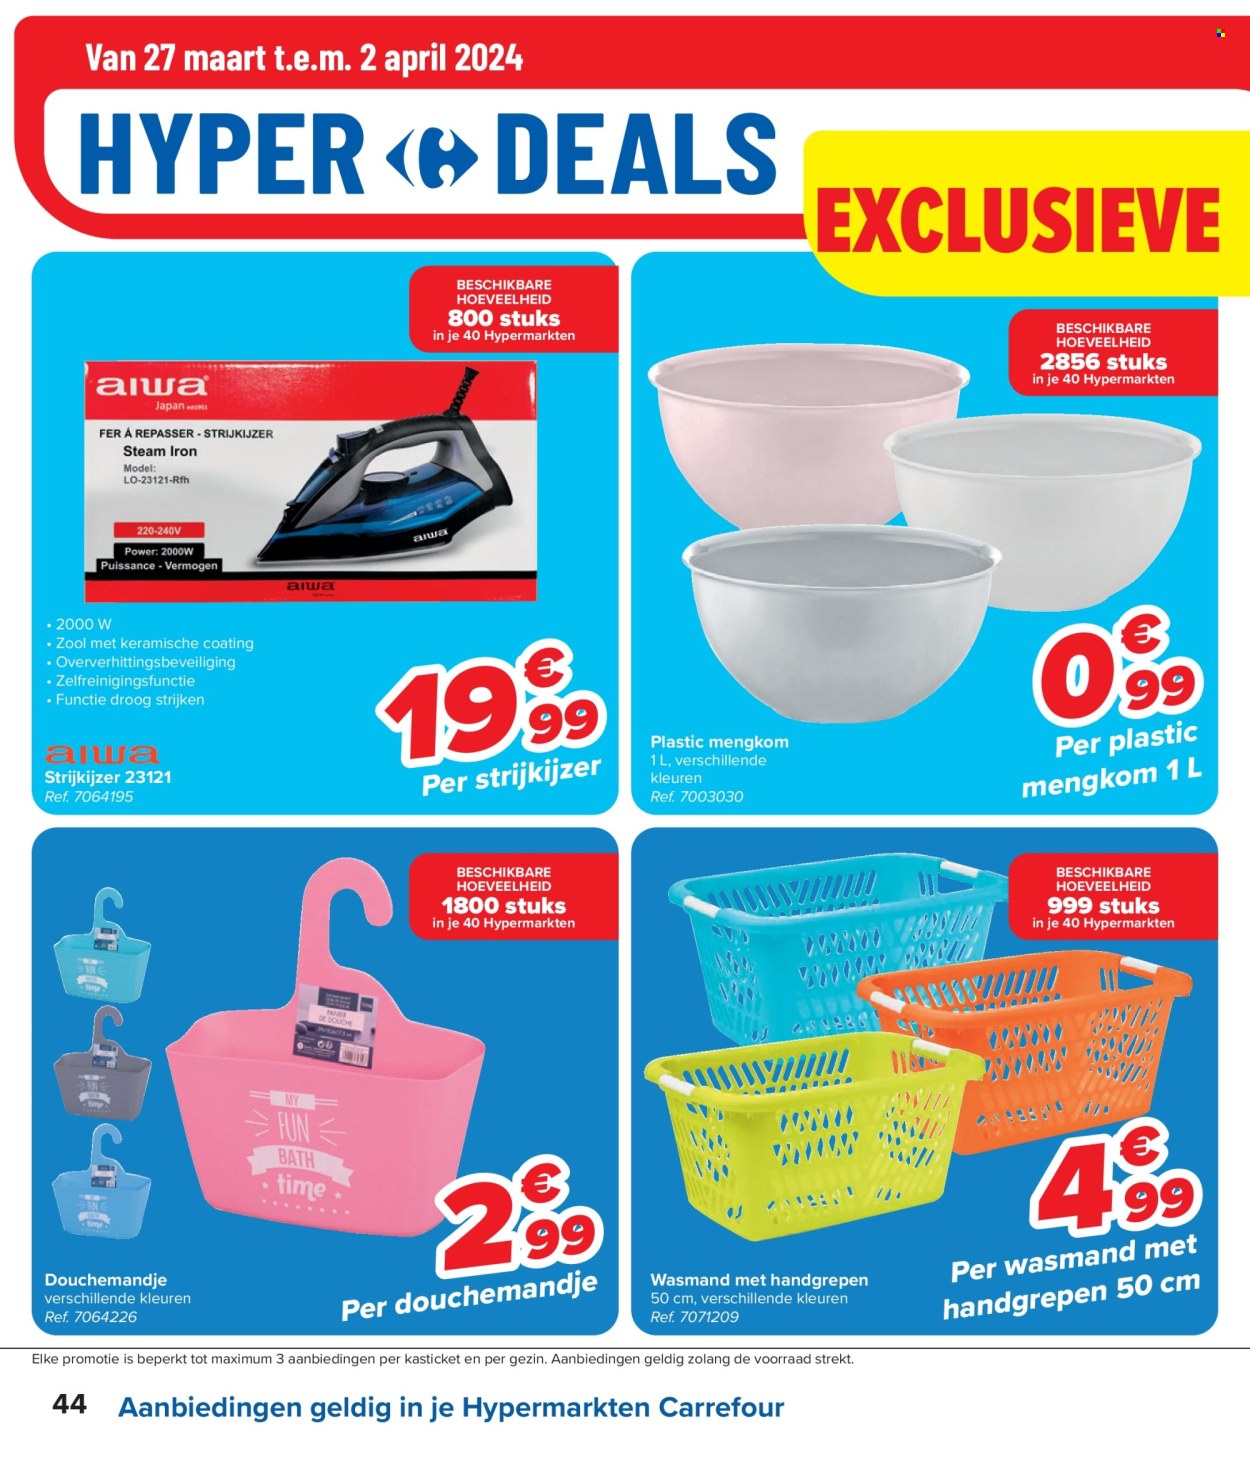 Catalogue Carrefour hypermarkt - 27.3.2024 - 8.4.2024. Page 44.